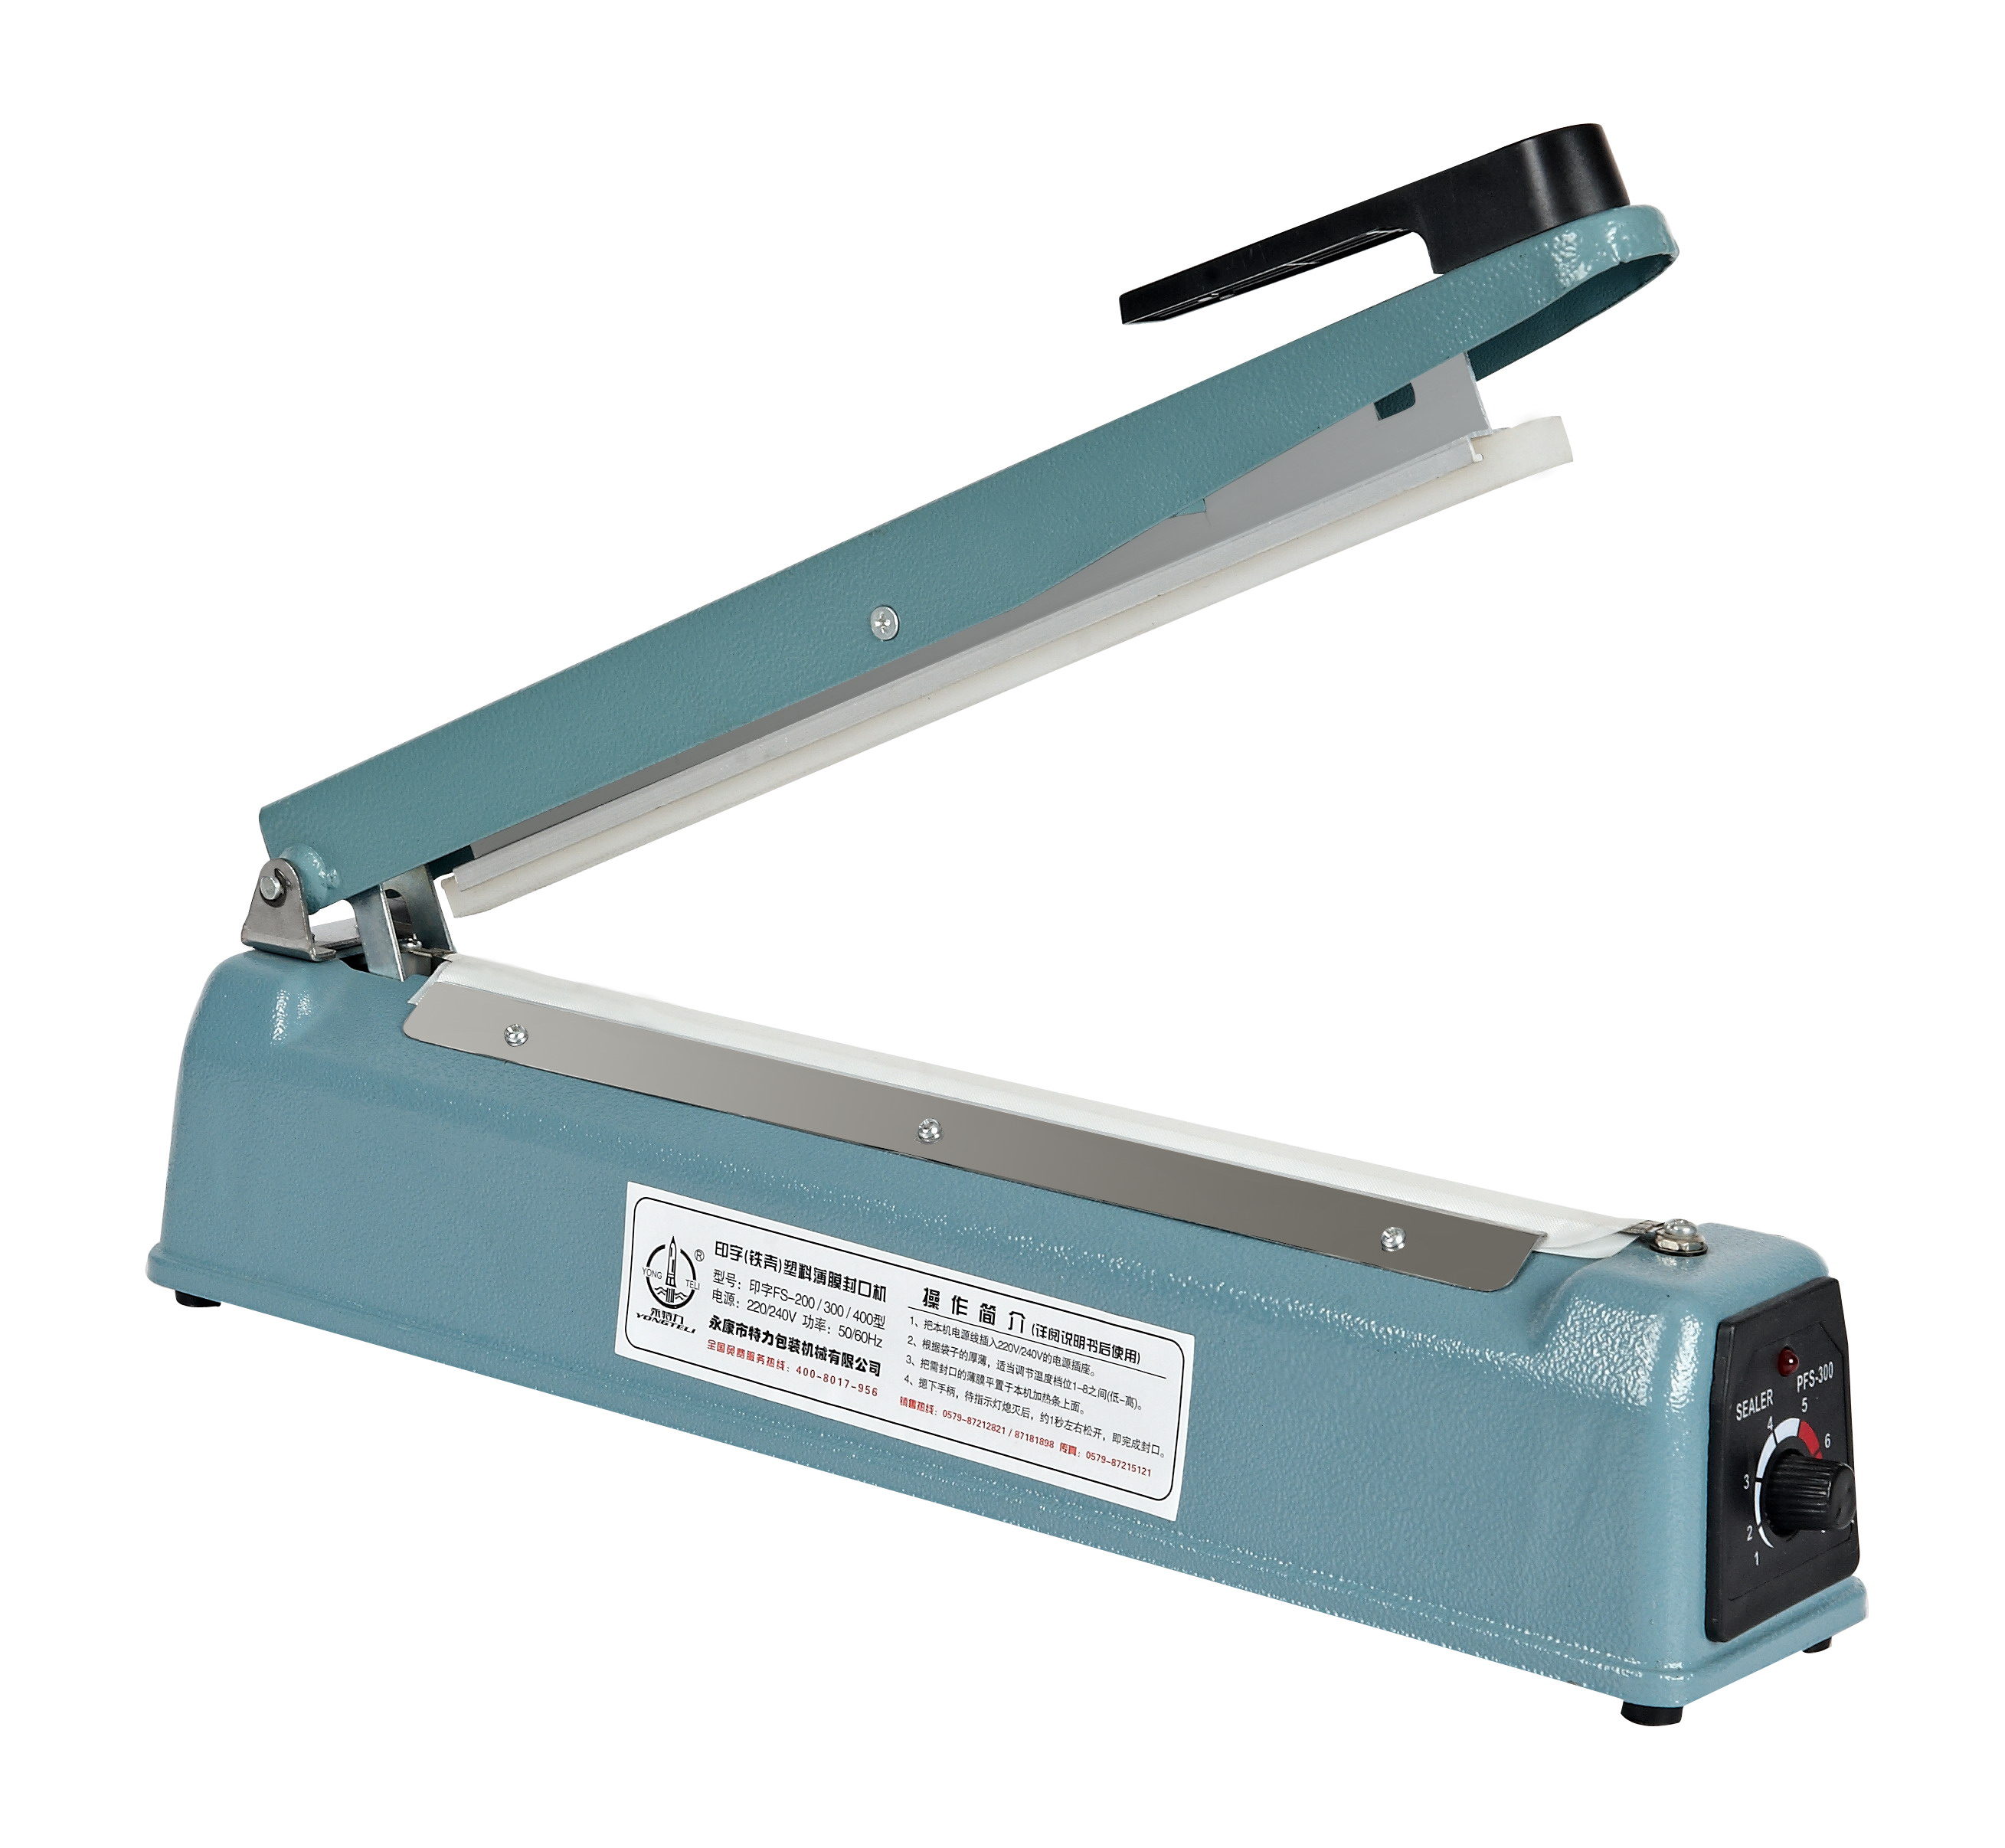 Zhejiang Tianyu industry Co. Ltd. Supplier Factory Production-Manufacturing and Exporting Hand Held Impulse Sealer With Coding Printing & 8mm Flat Heating Element Wire FS Series Sealing Machine